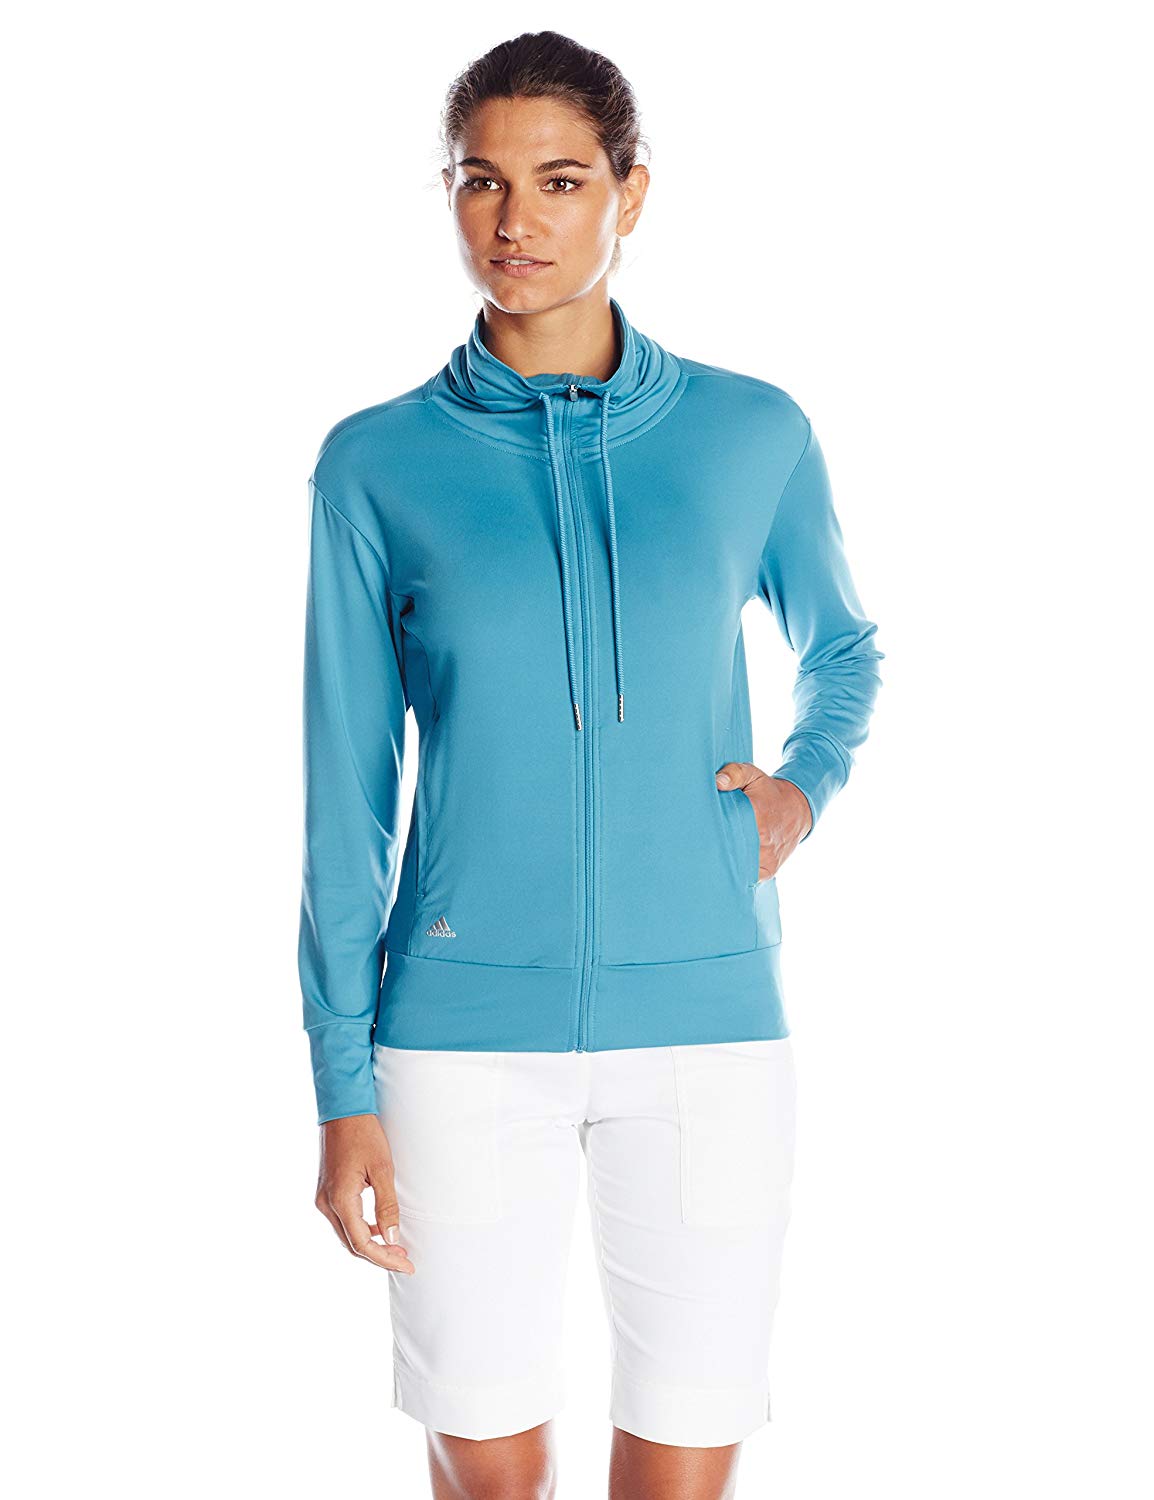 Buy Adidas Womens Golf Jackets for Best Prices Online!